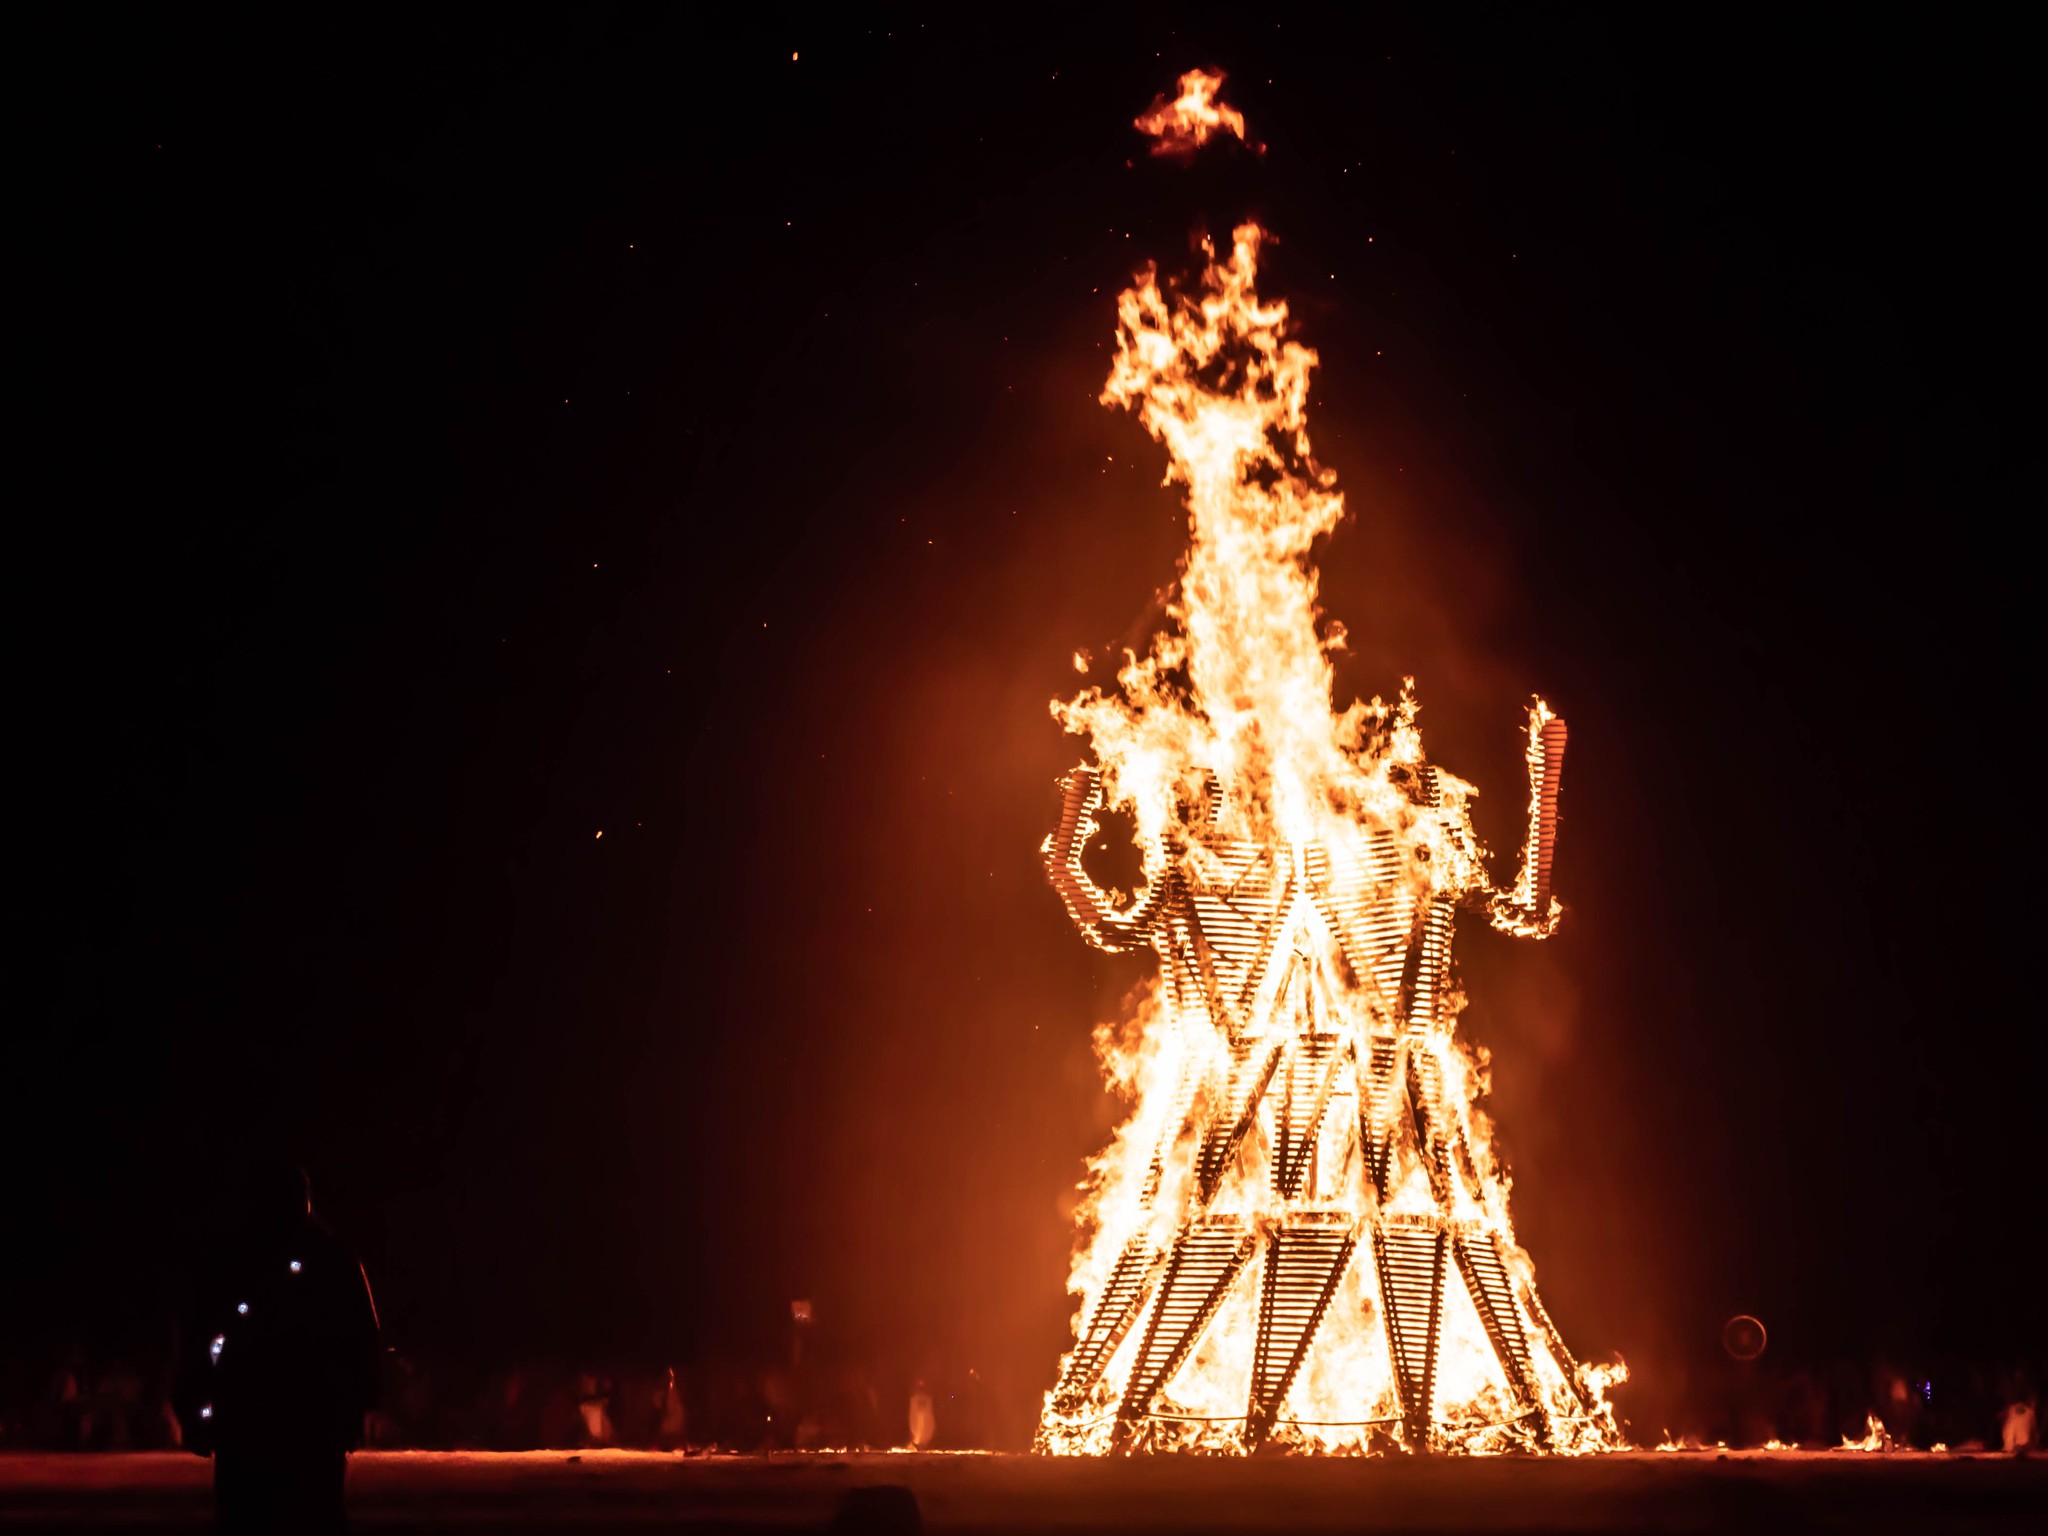 The burning ritual is a spectacular sight to see | Photo credits: David Gwynne-Evans